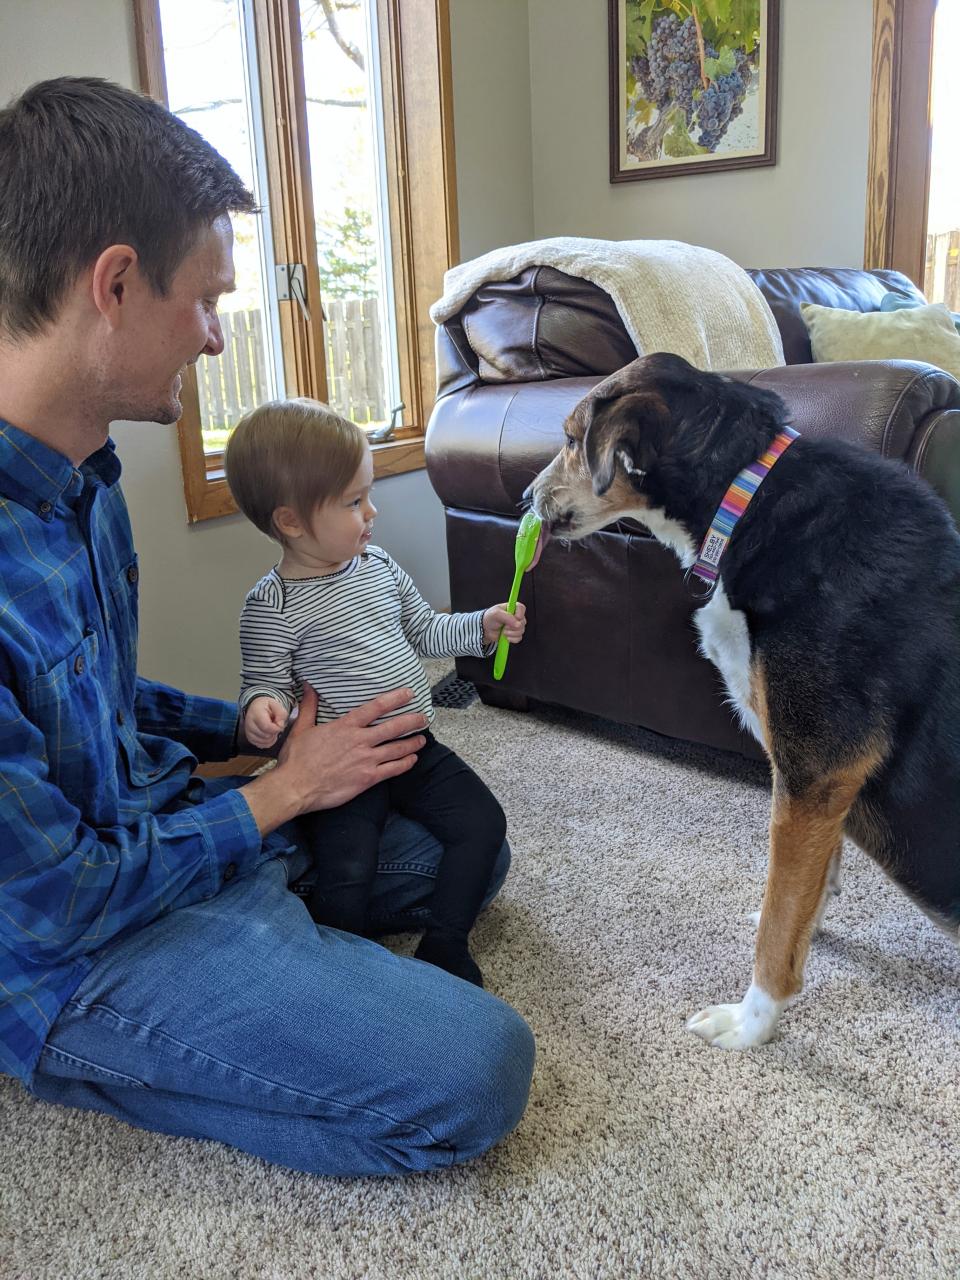 A toddler feeds a dog from a spatula